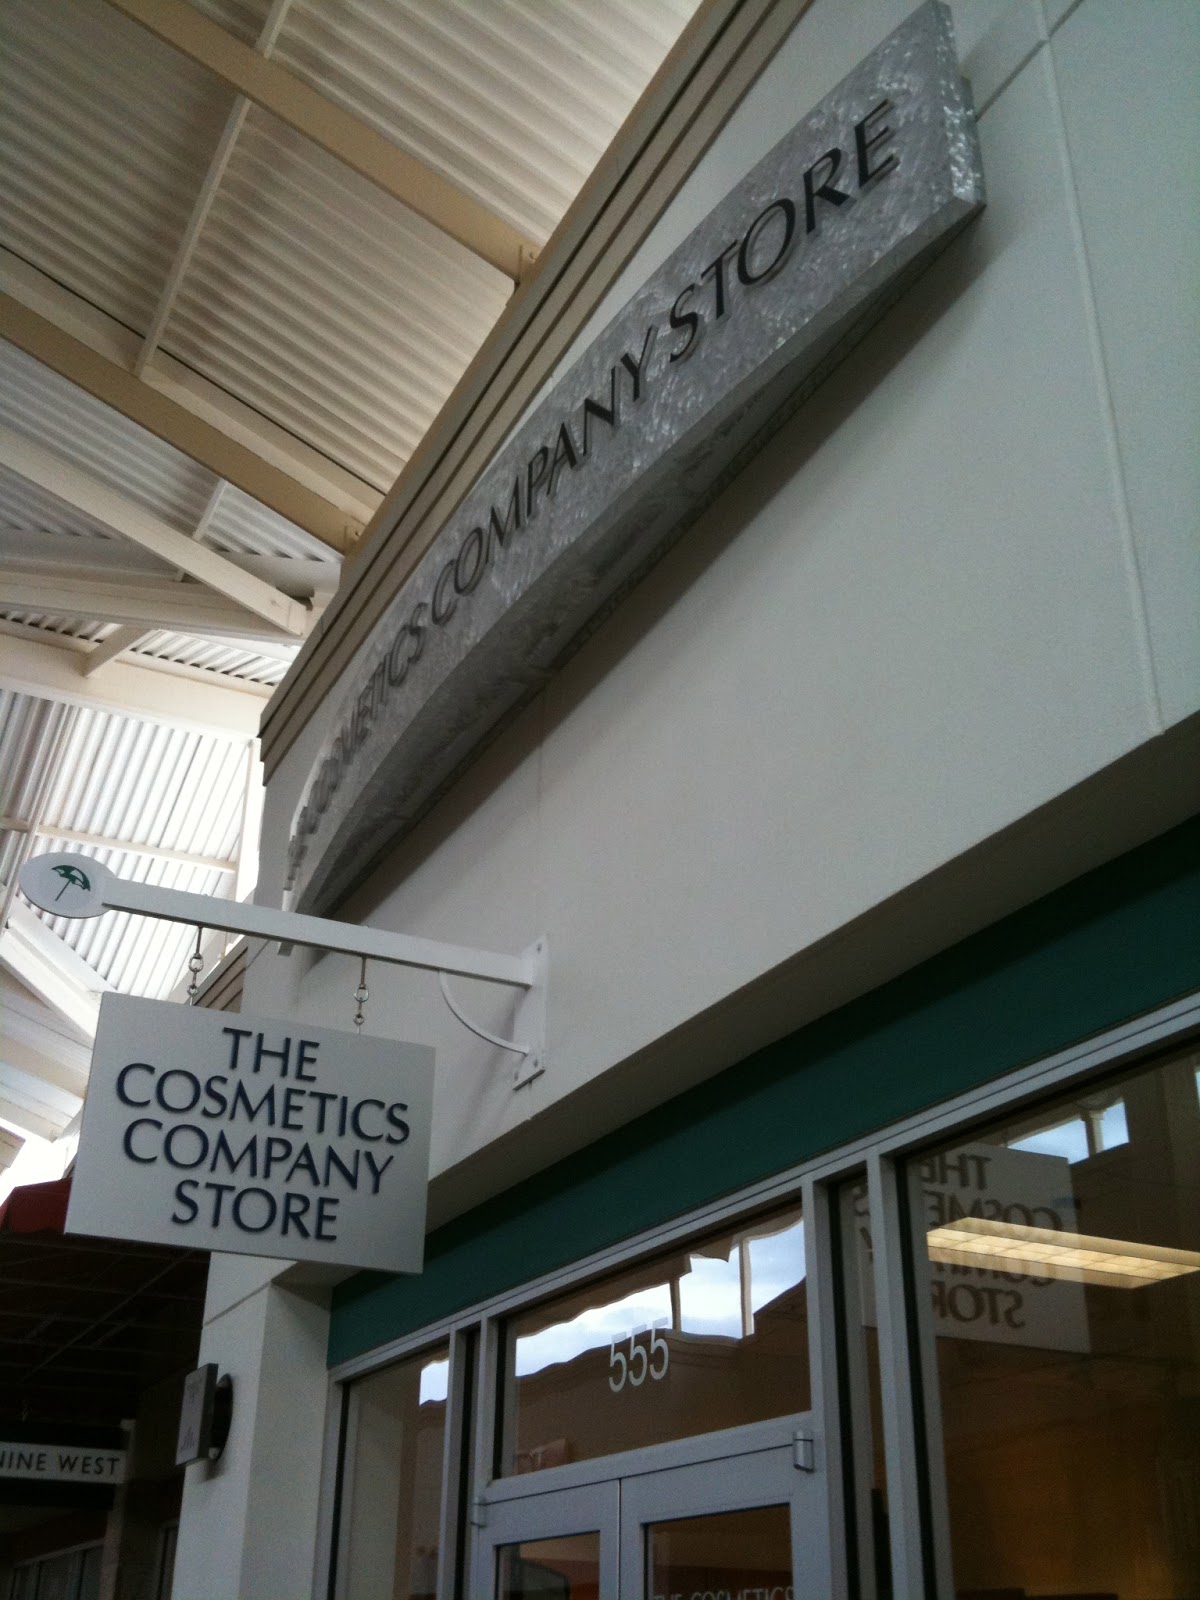 from Sassi, who lived it...: A Visit to The Cosmetics Company Store